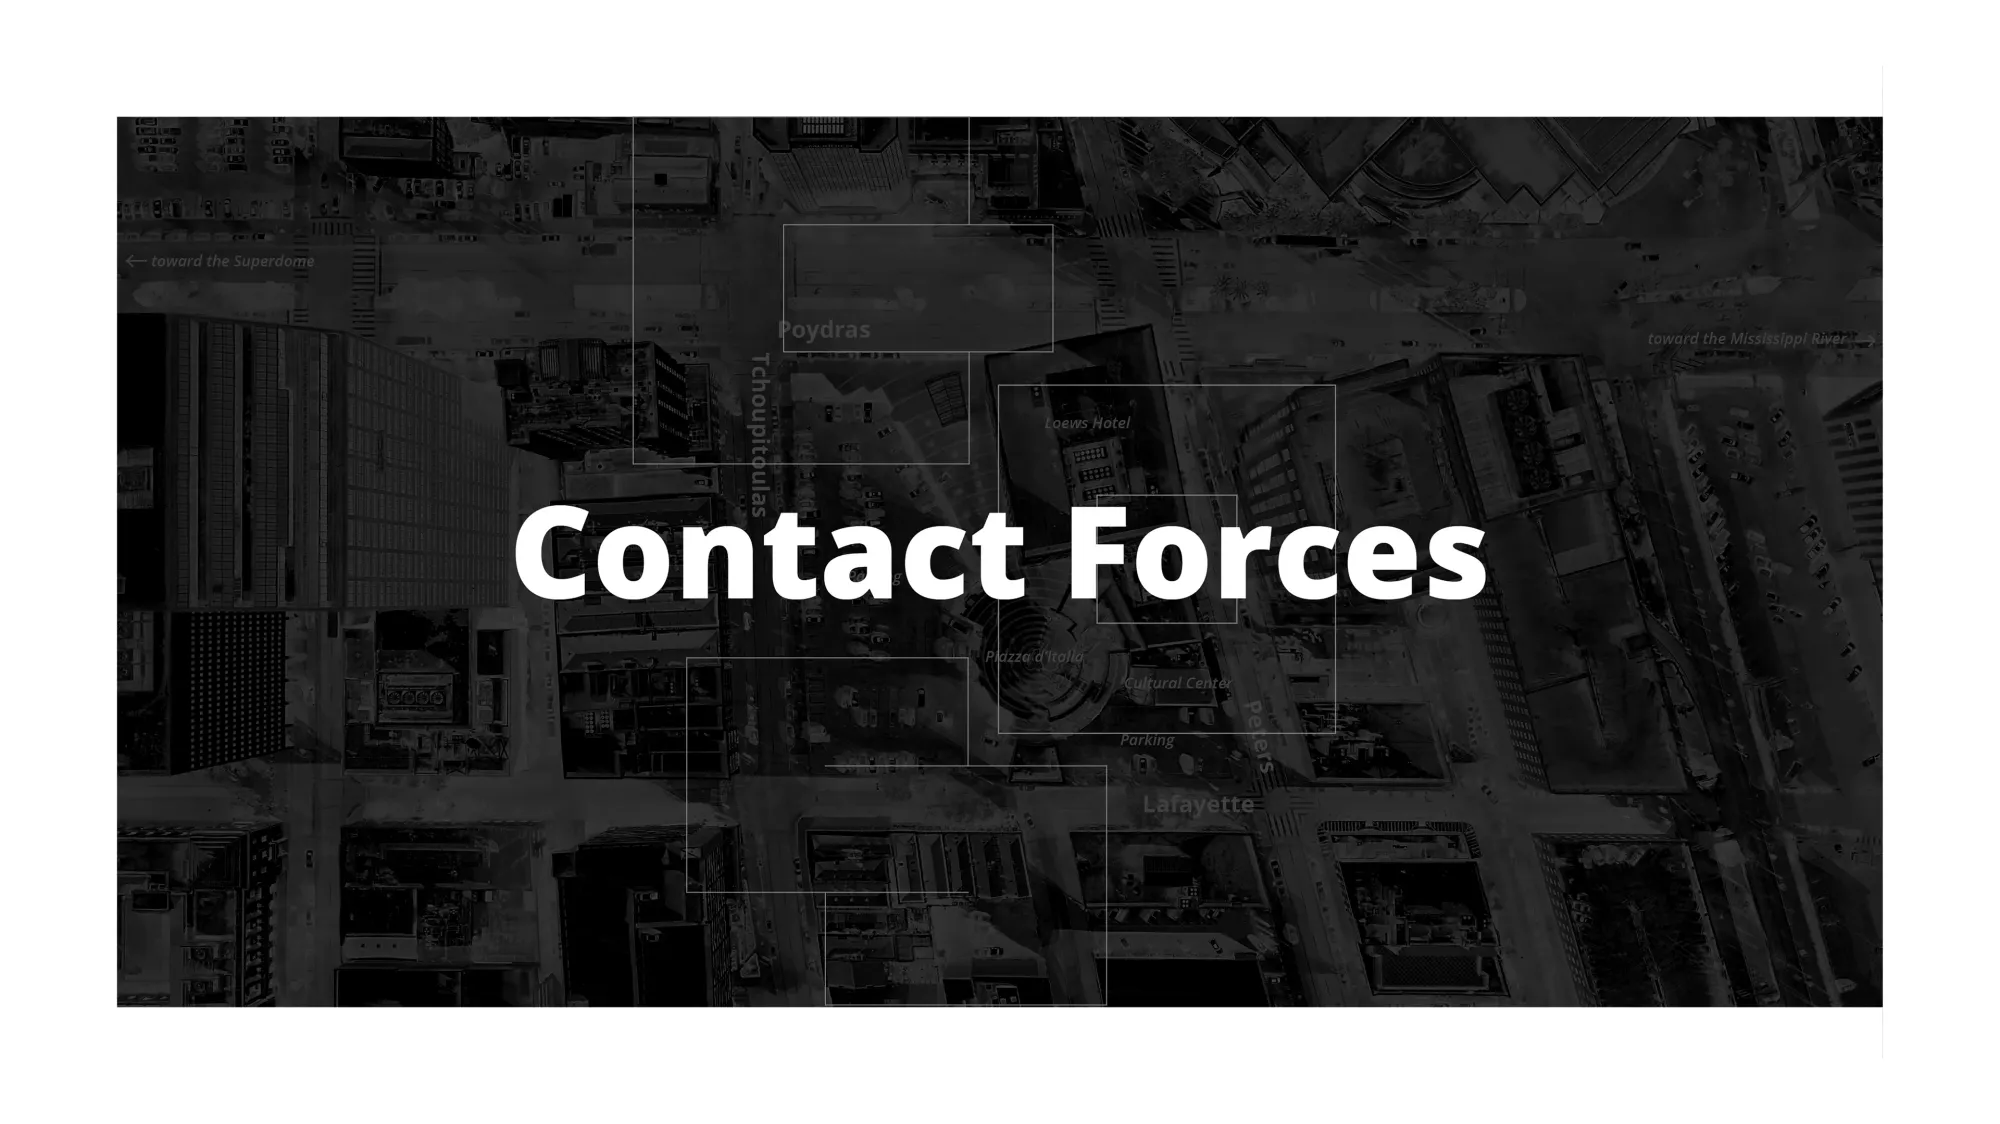 Contact Forces